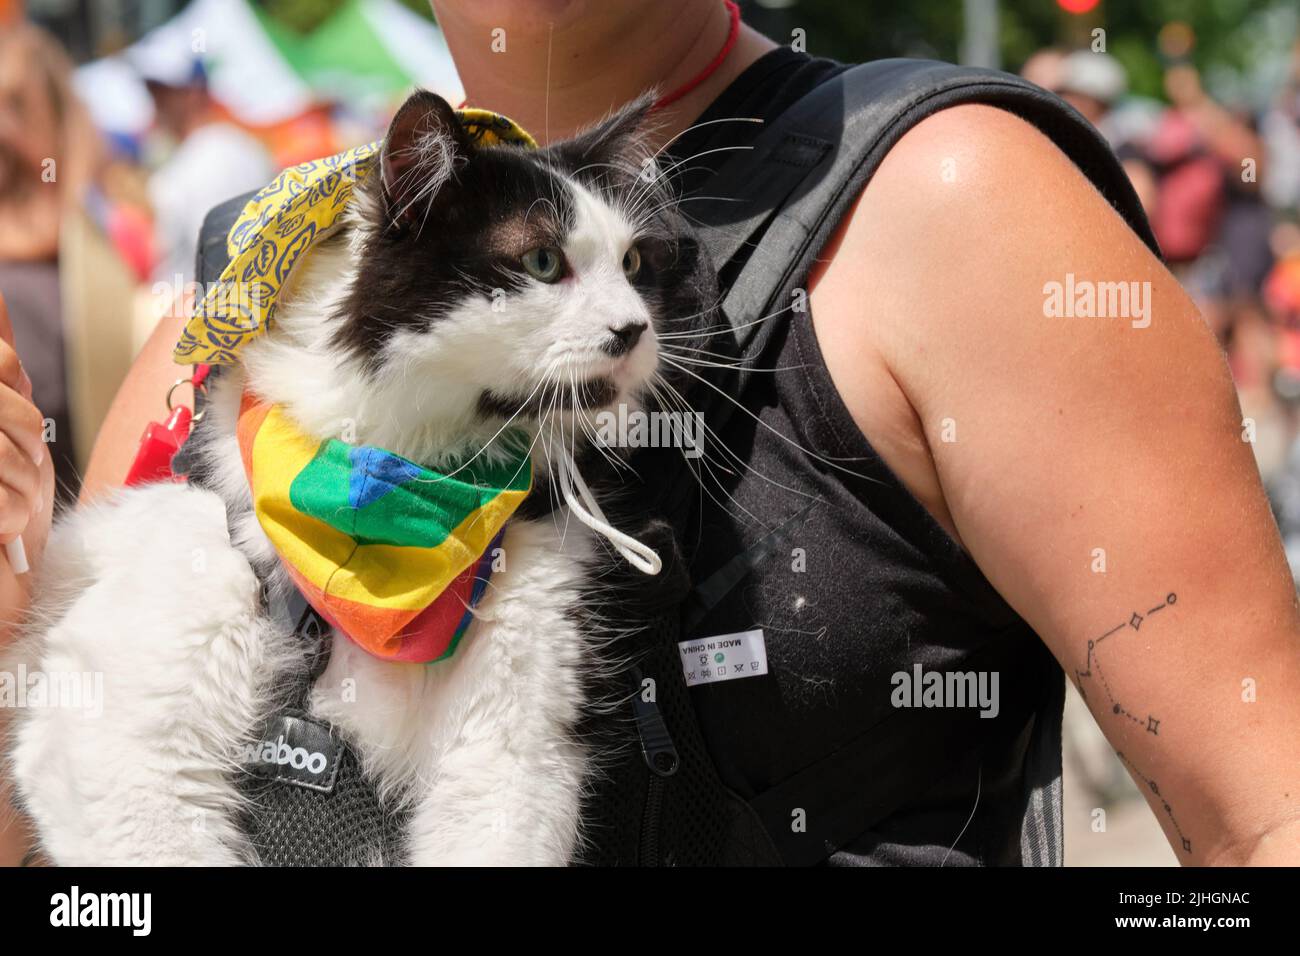 Halifax Pride Parade- Cat outfitted in Pride rainbow colours Stock Photo